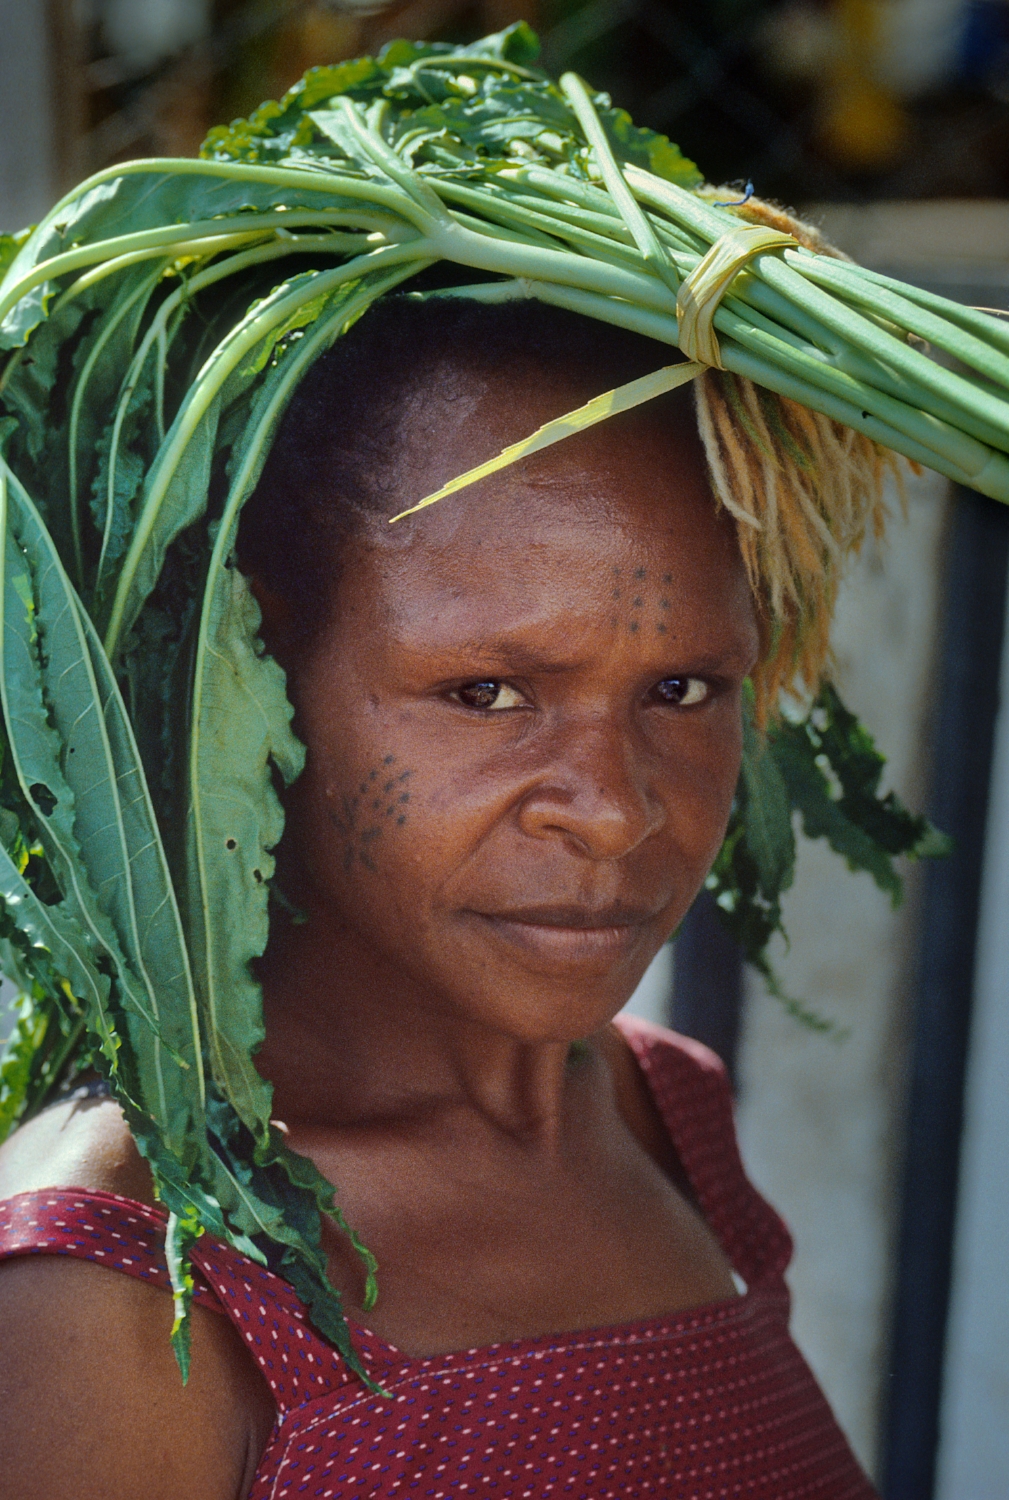  Her arms full of other groceries, an unidentified woman carries food on her head in Port Moresby, Papua New Guinea. 